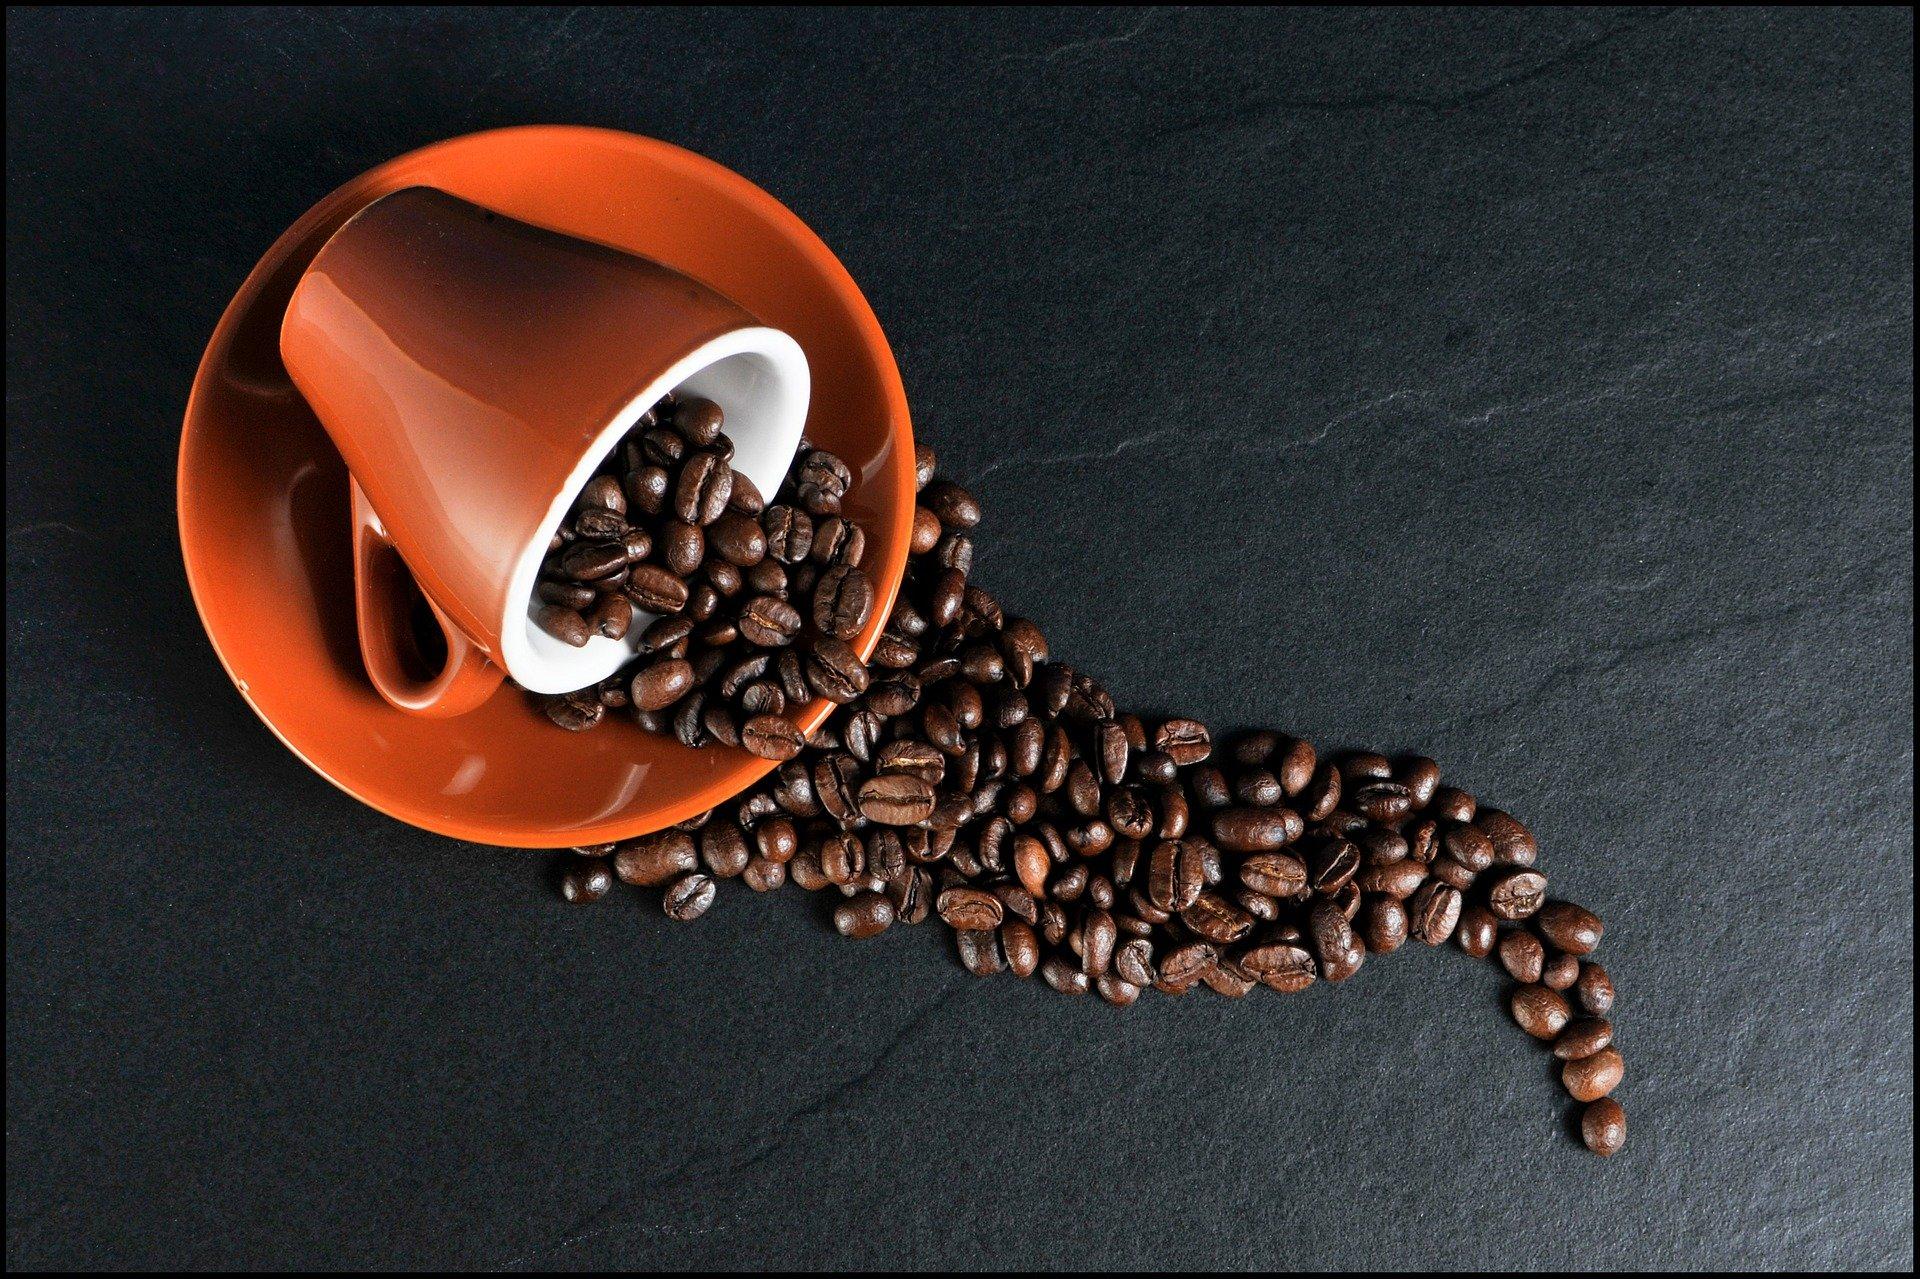 Coffee and Its Relationship With Cancer